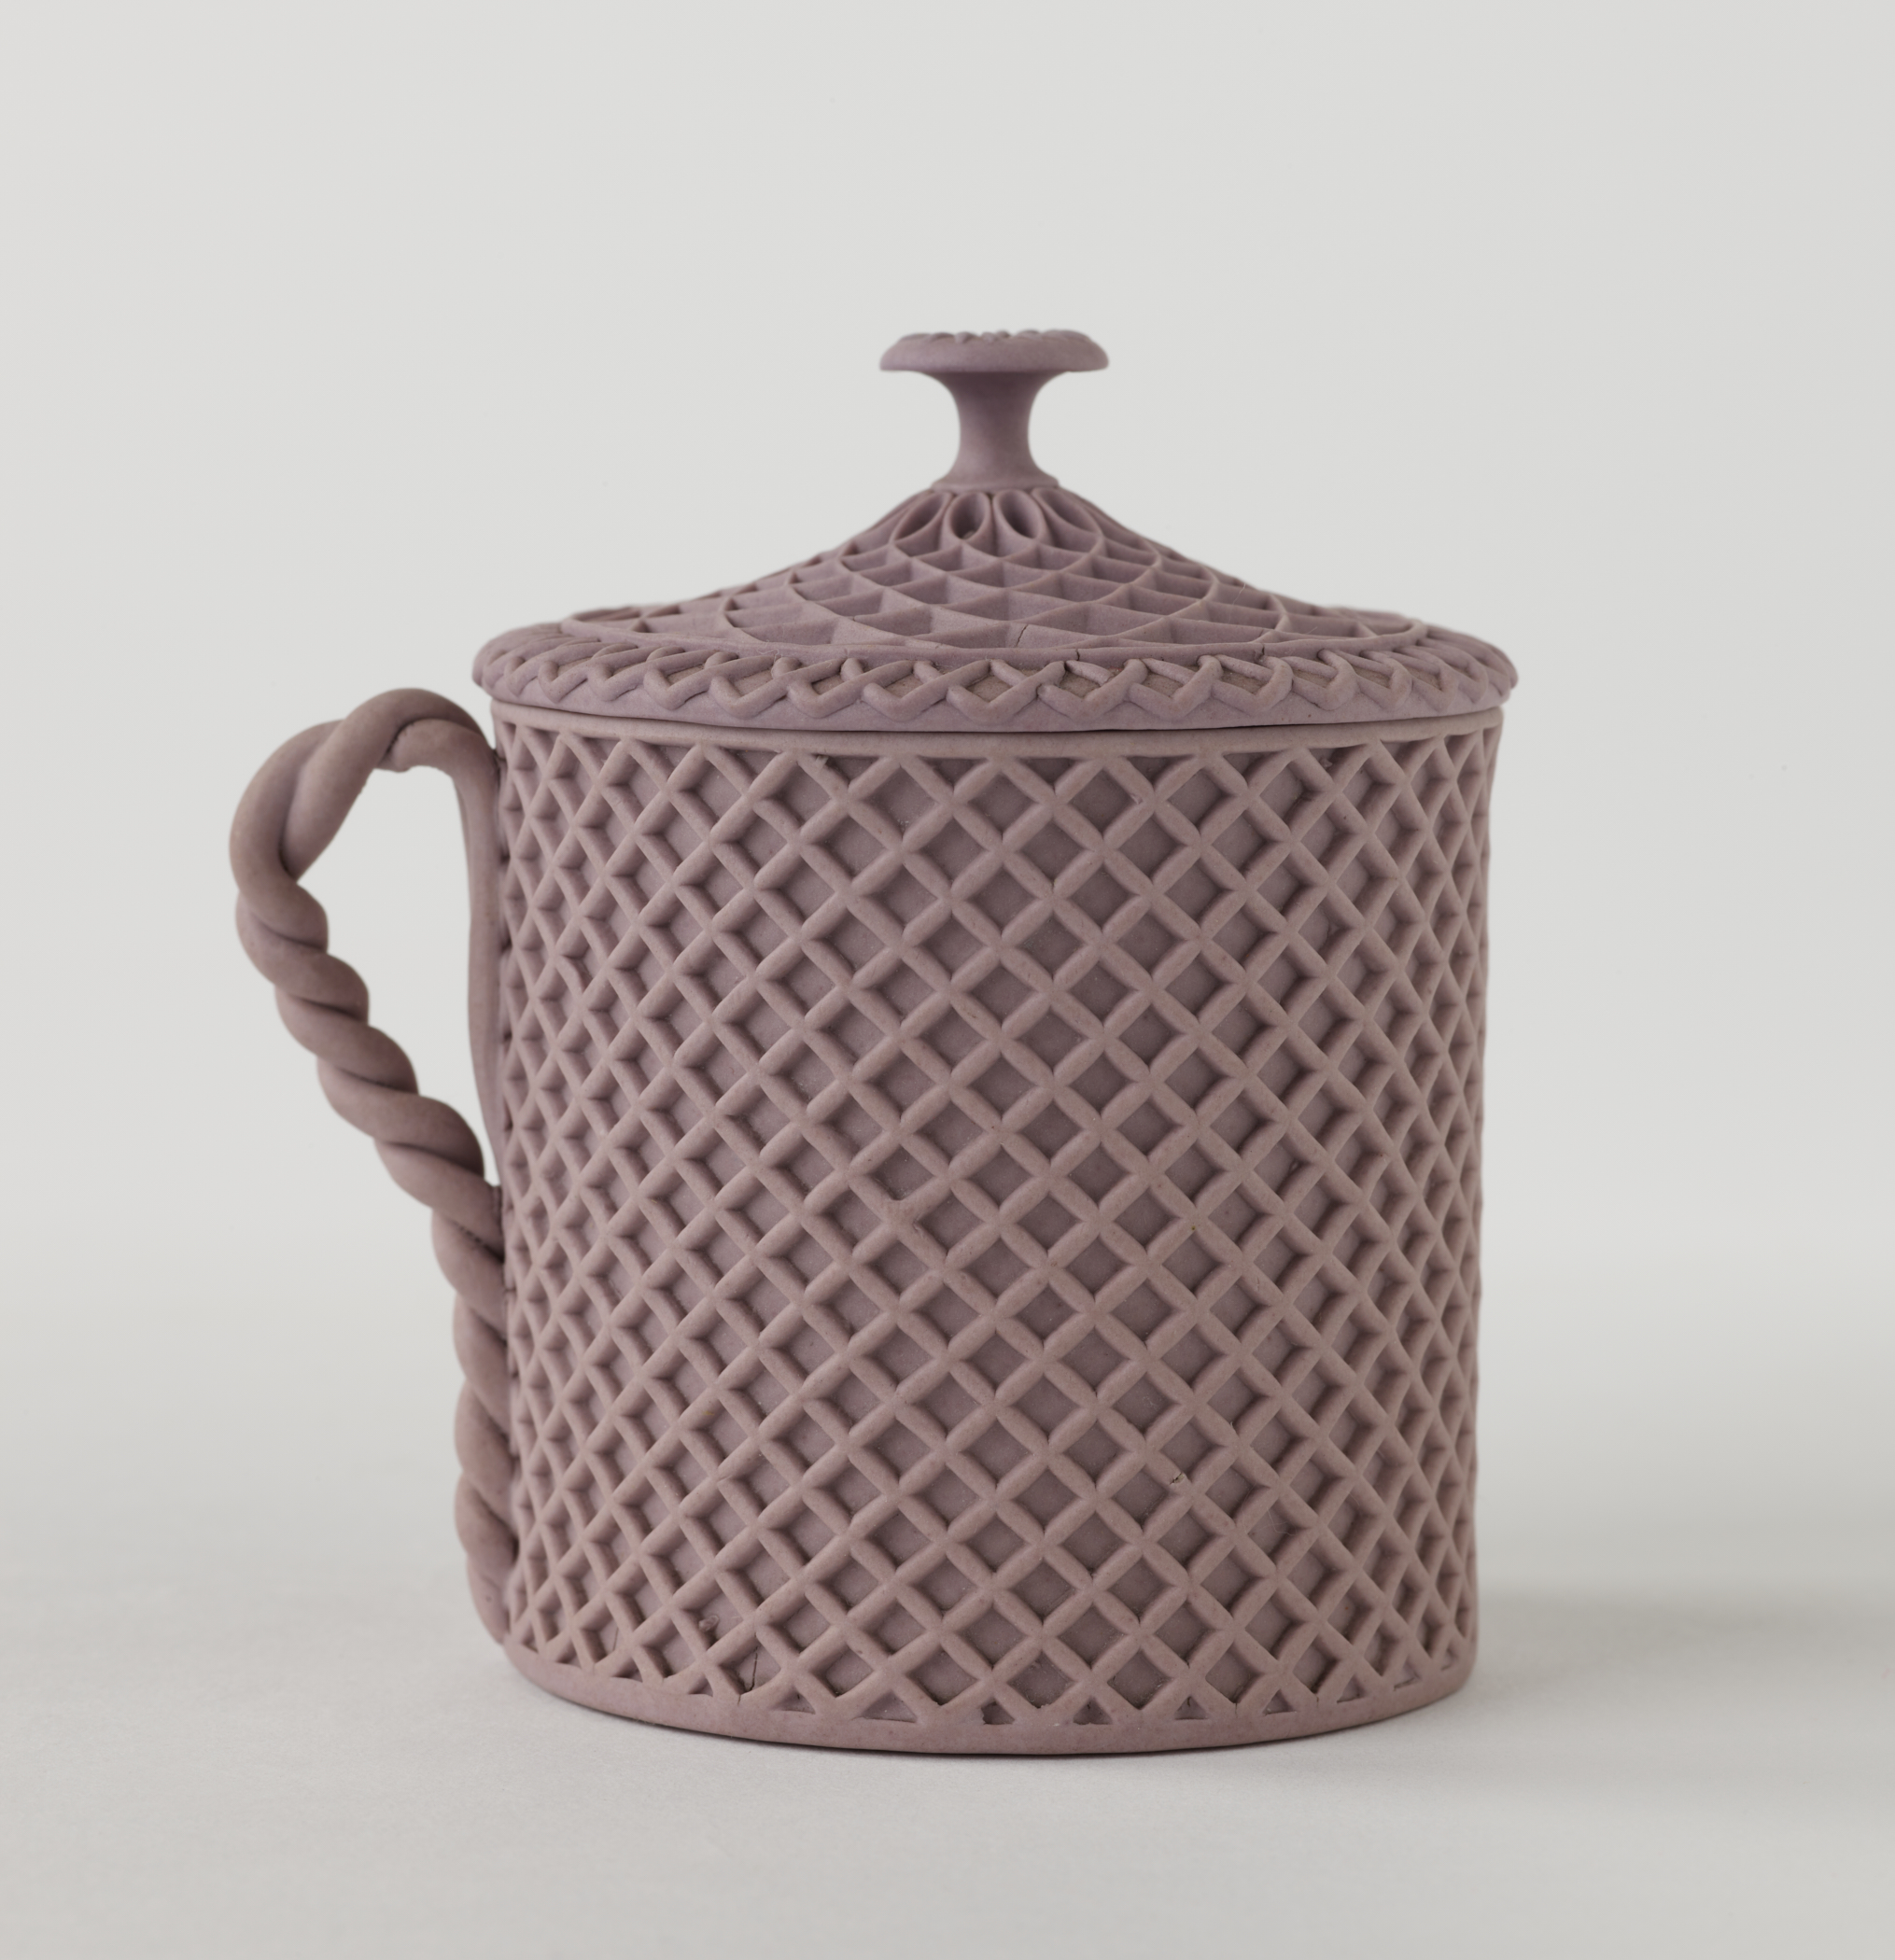 /Jasperware%20custard%20cup%20with%20cover%2C%20the%20entire%20vessel%20and%20lid%20has%20a%20raised%20woven%20texture.%20The%20handle%20is%20sculptural%20and%20swirled.